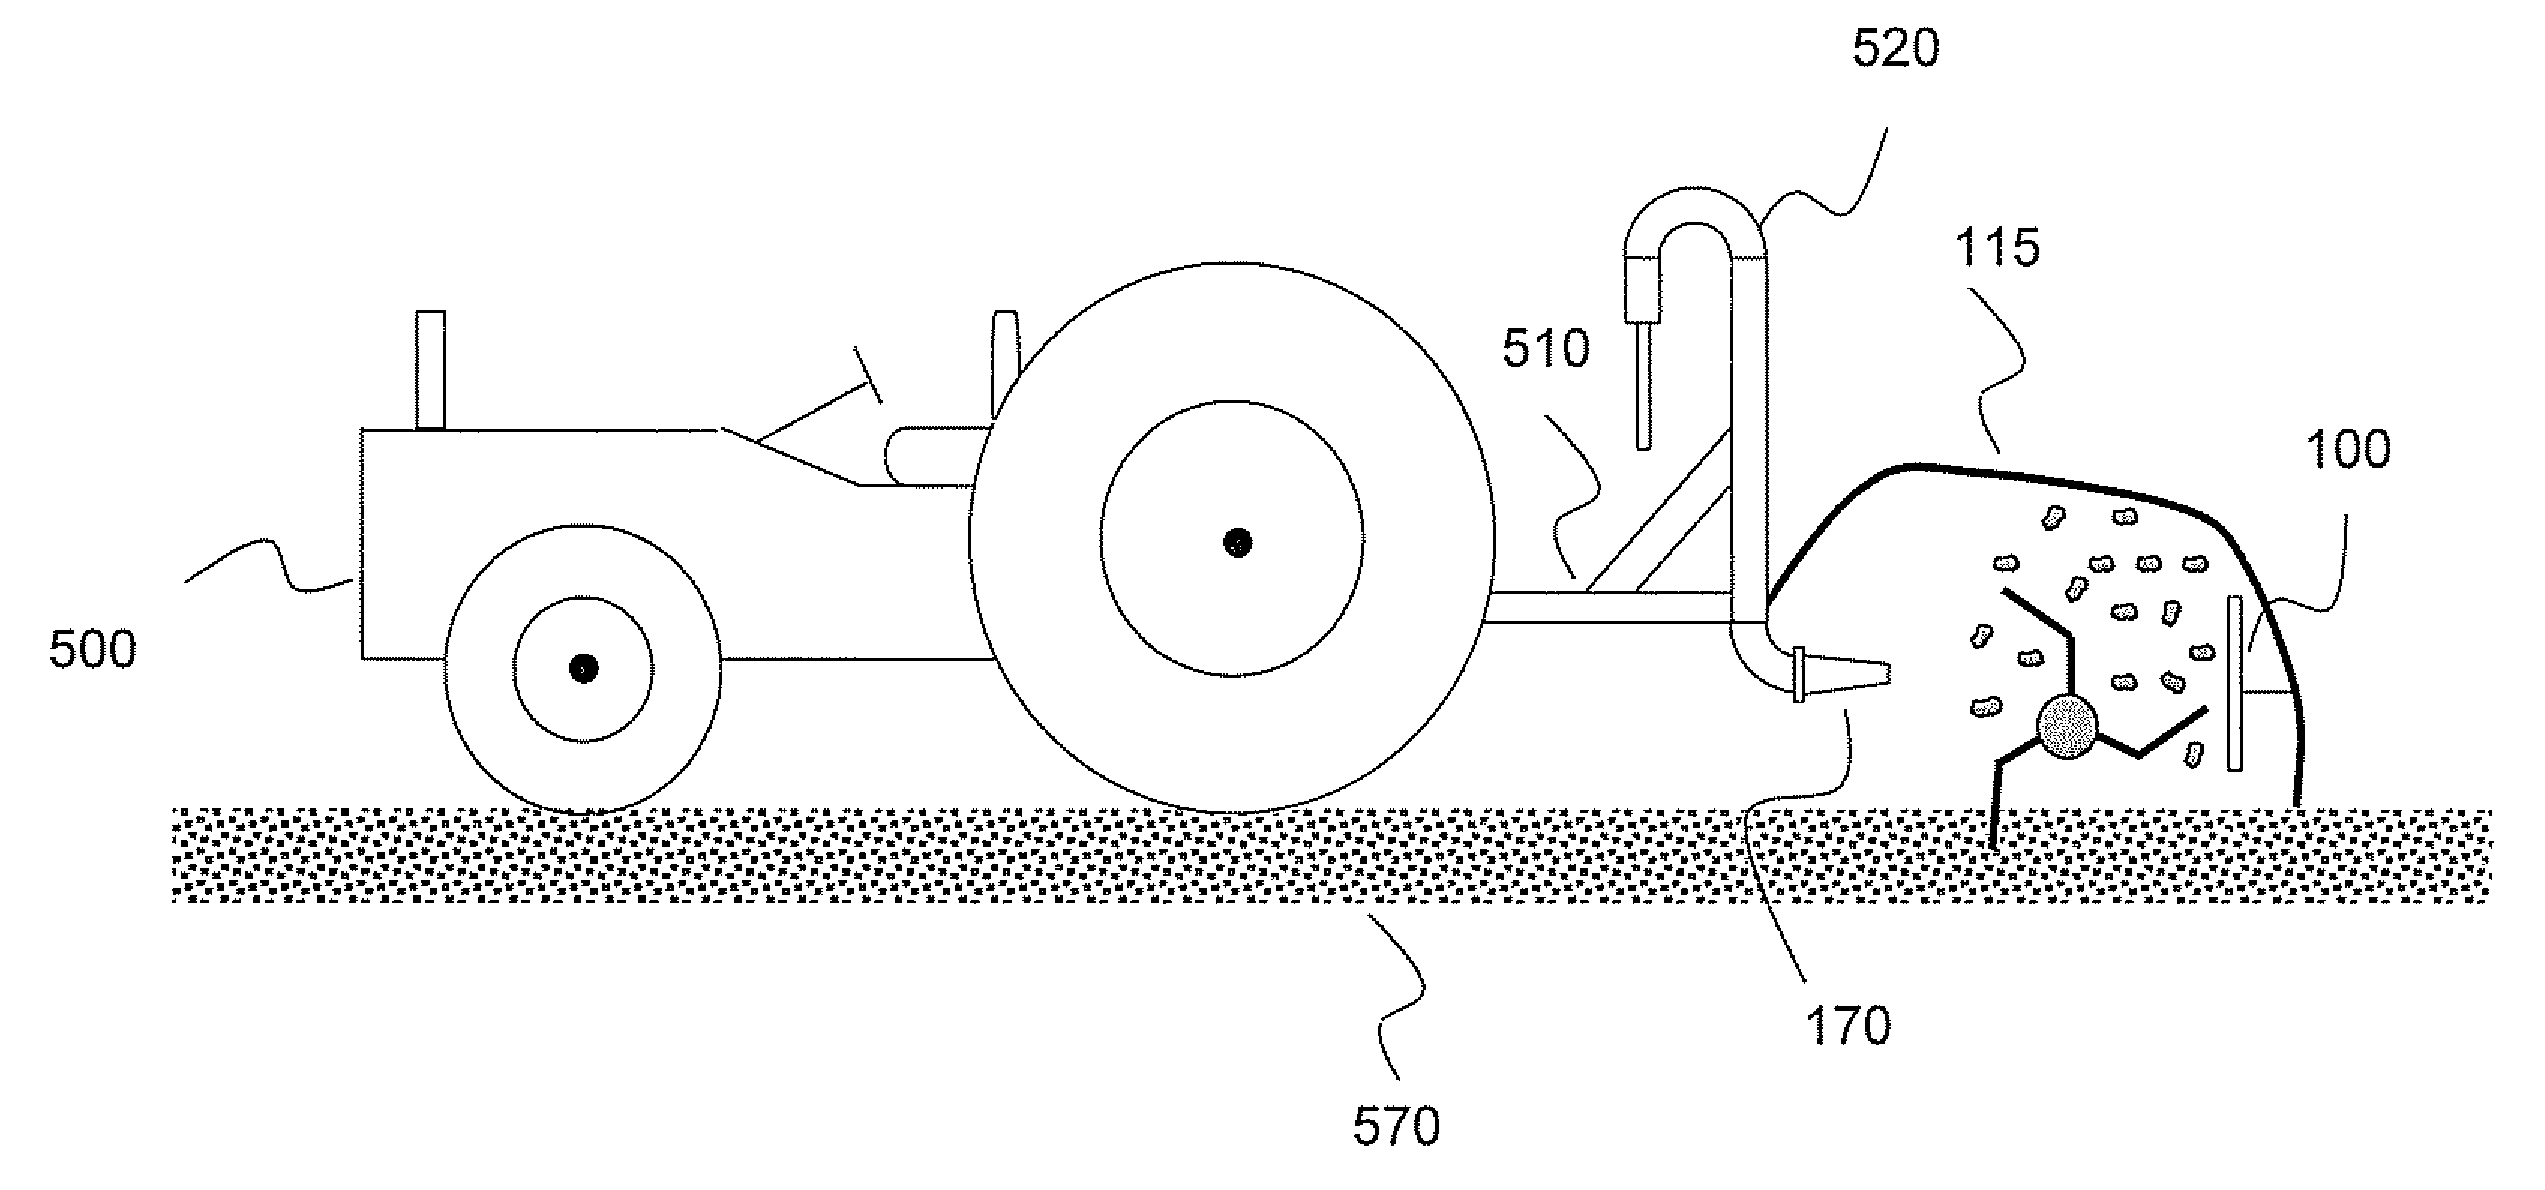 Method And System For Disinfection And Aeration Of Soil